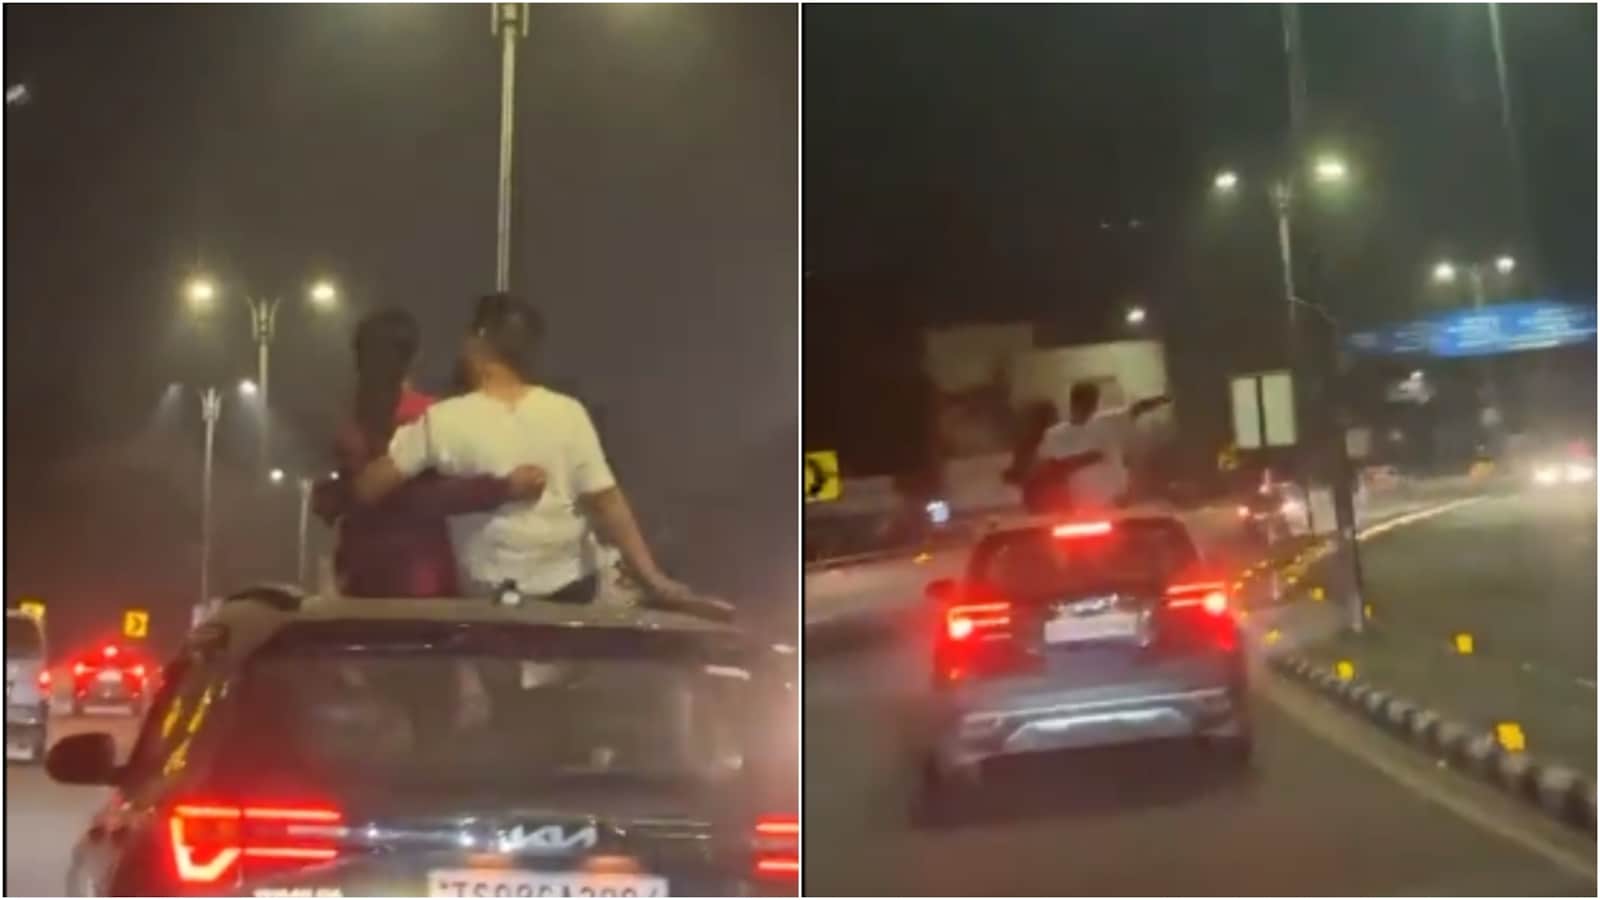 Xxx Jks Hd Vidio - Hyderabad couple kisses while hanging out of sunroof in viral video.  Internet is divided